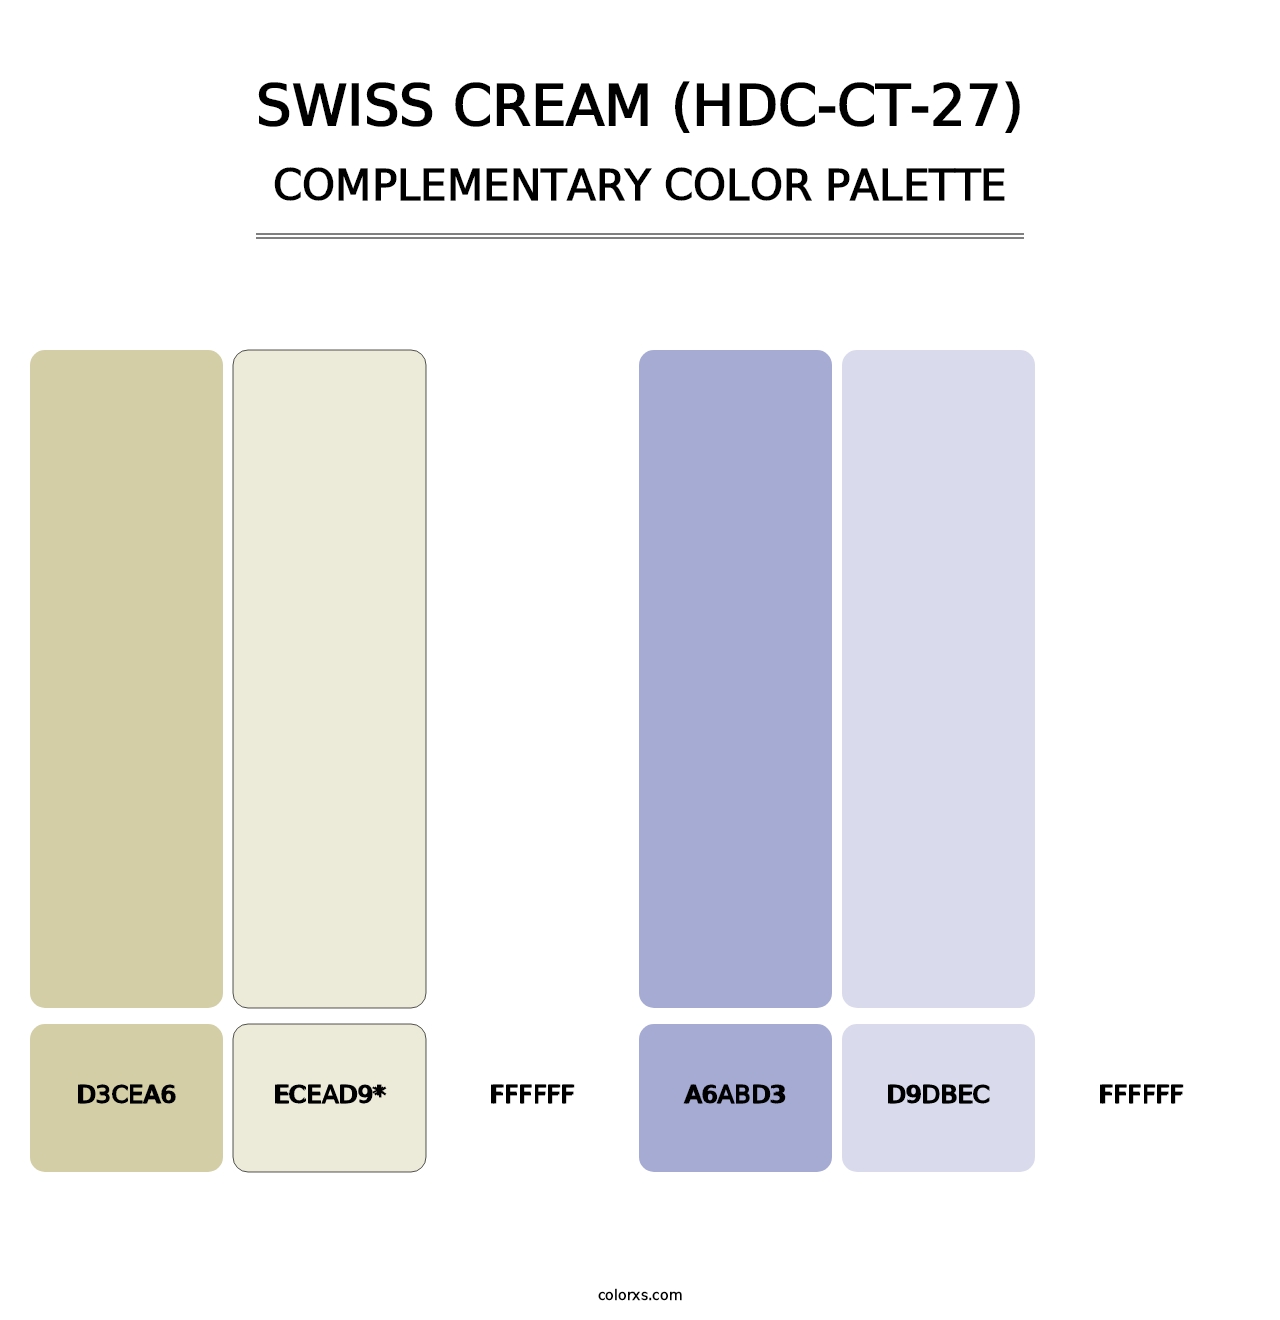 Swiss Cream (HDC-CT-27) - Complementary Color Palette